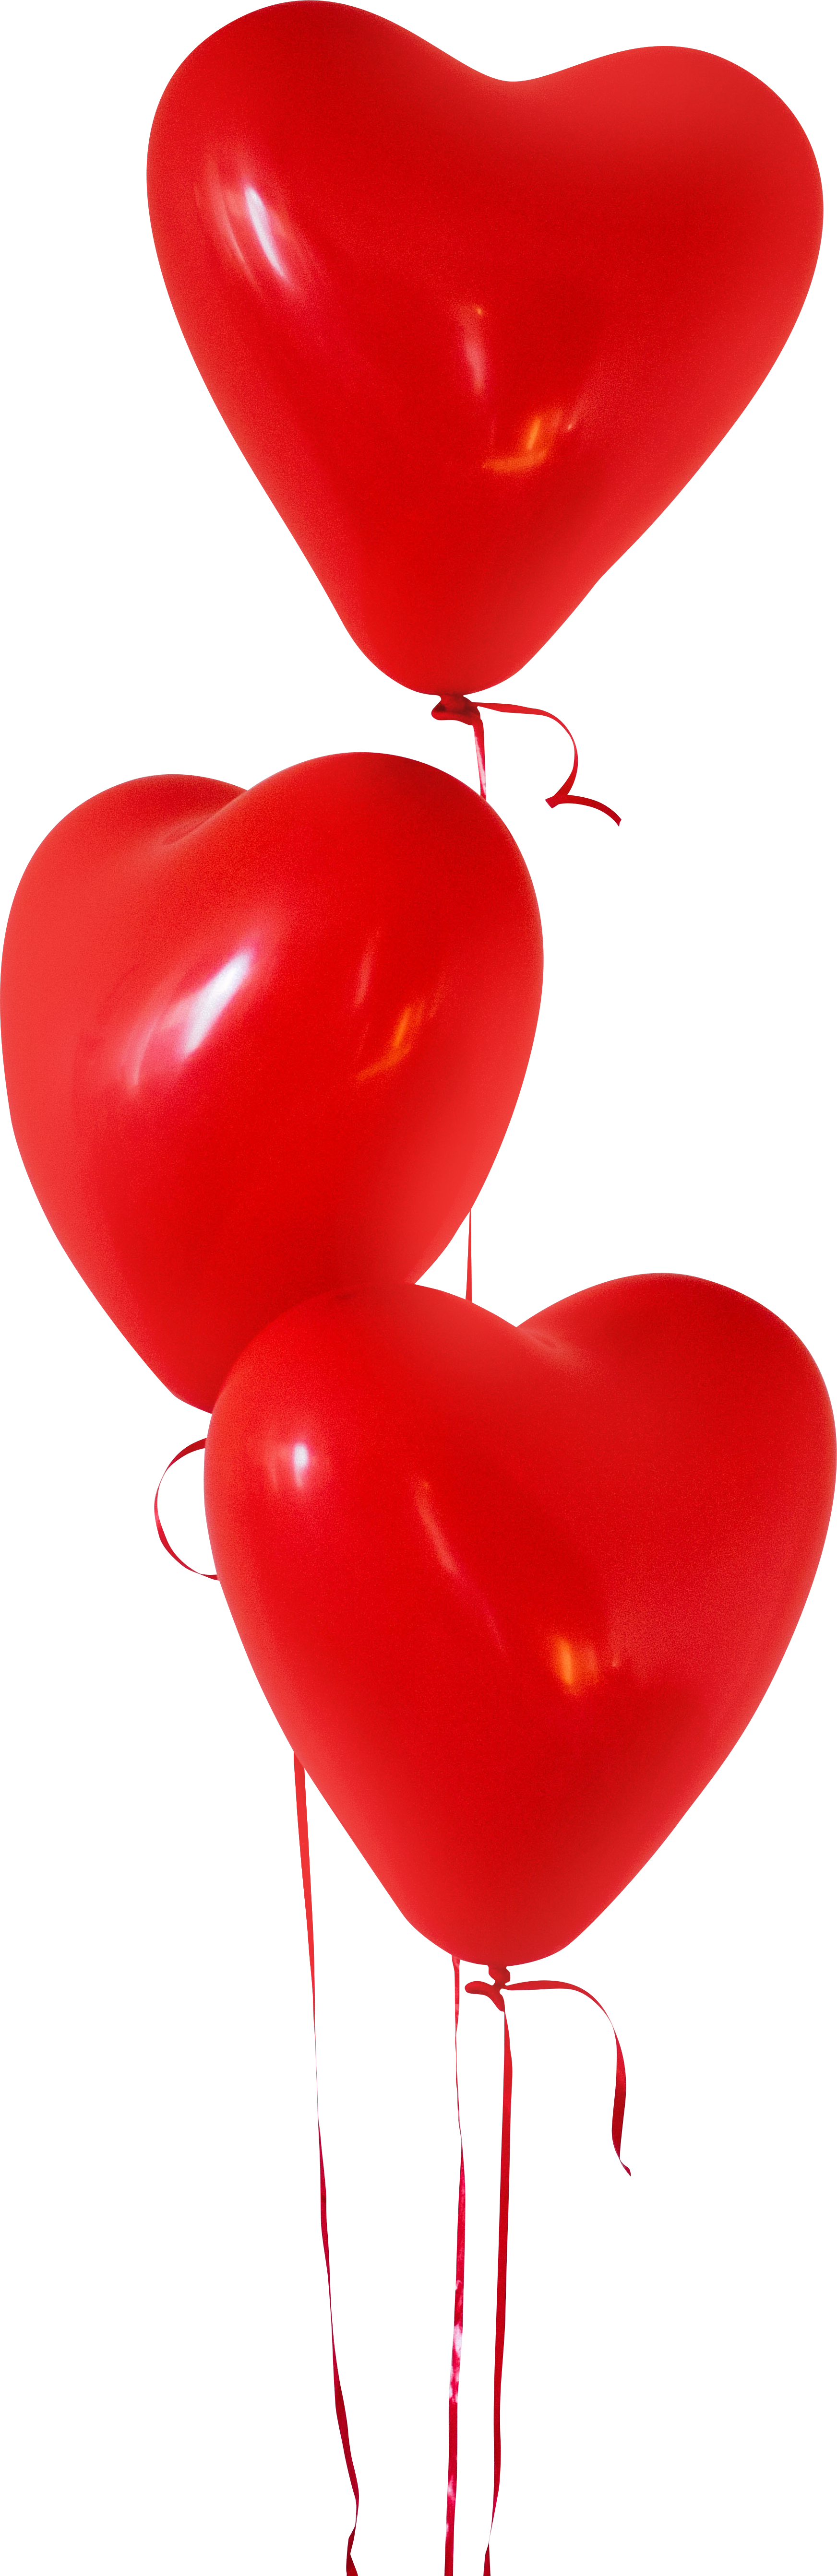 Heart Red Balloons Free PNG Image